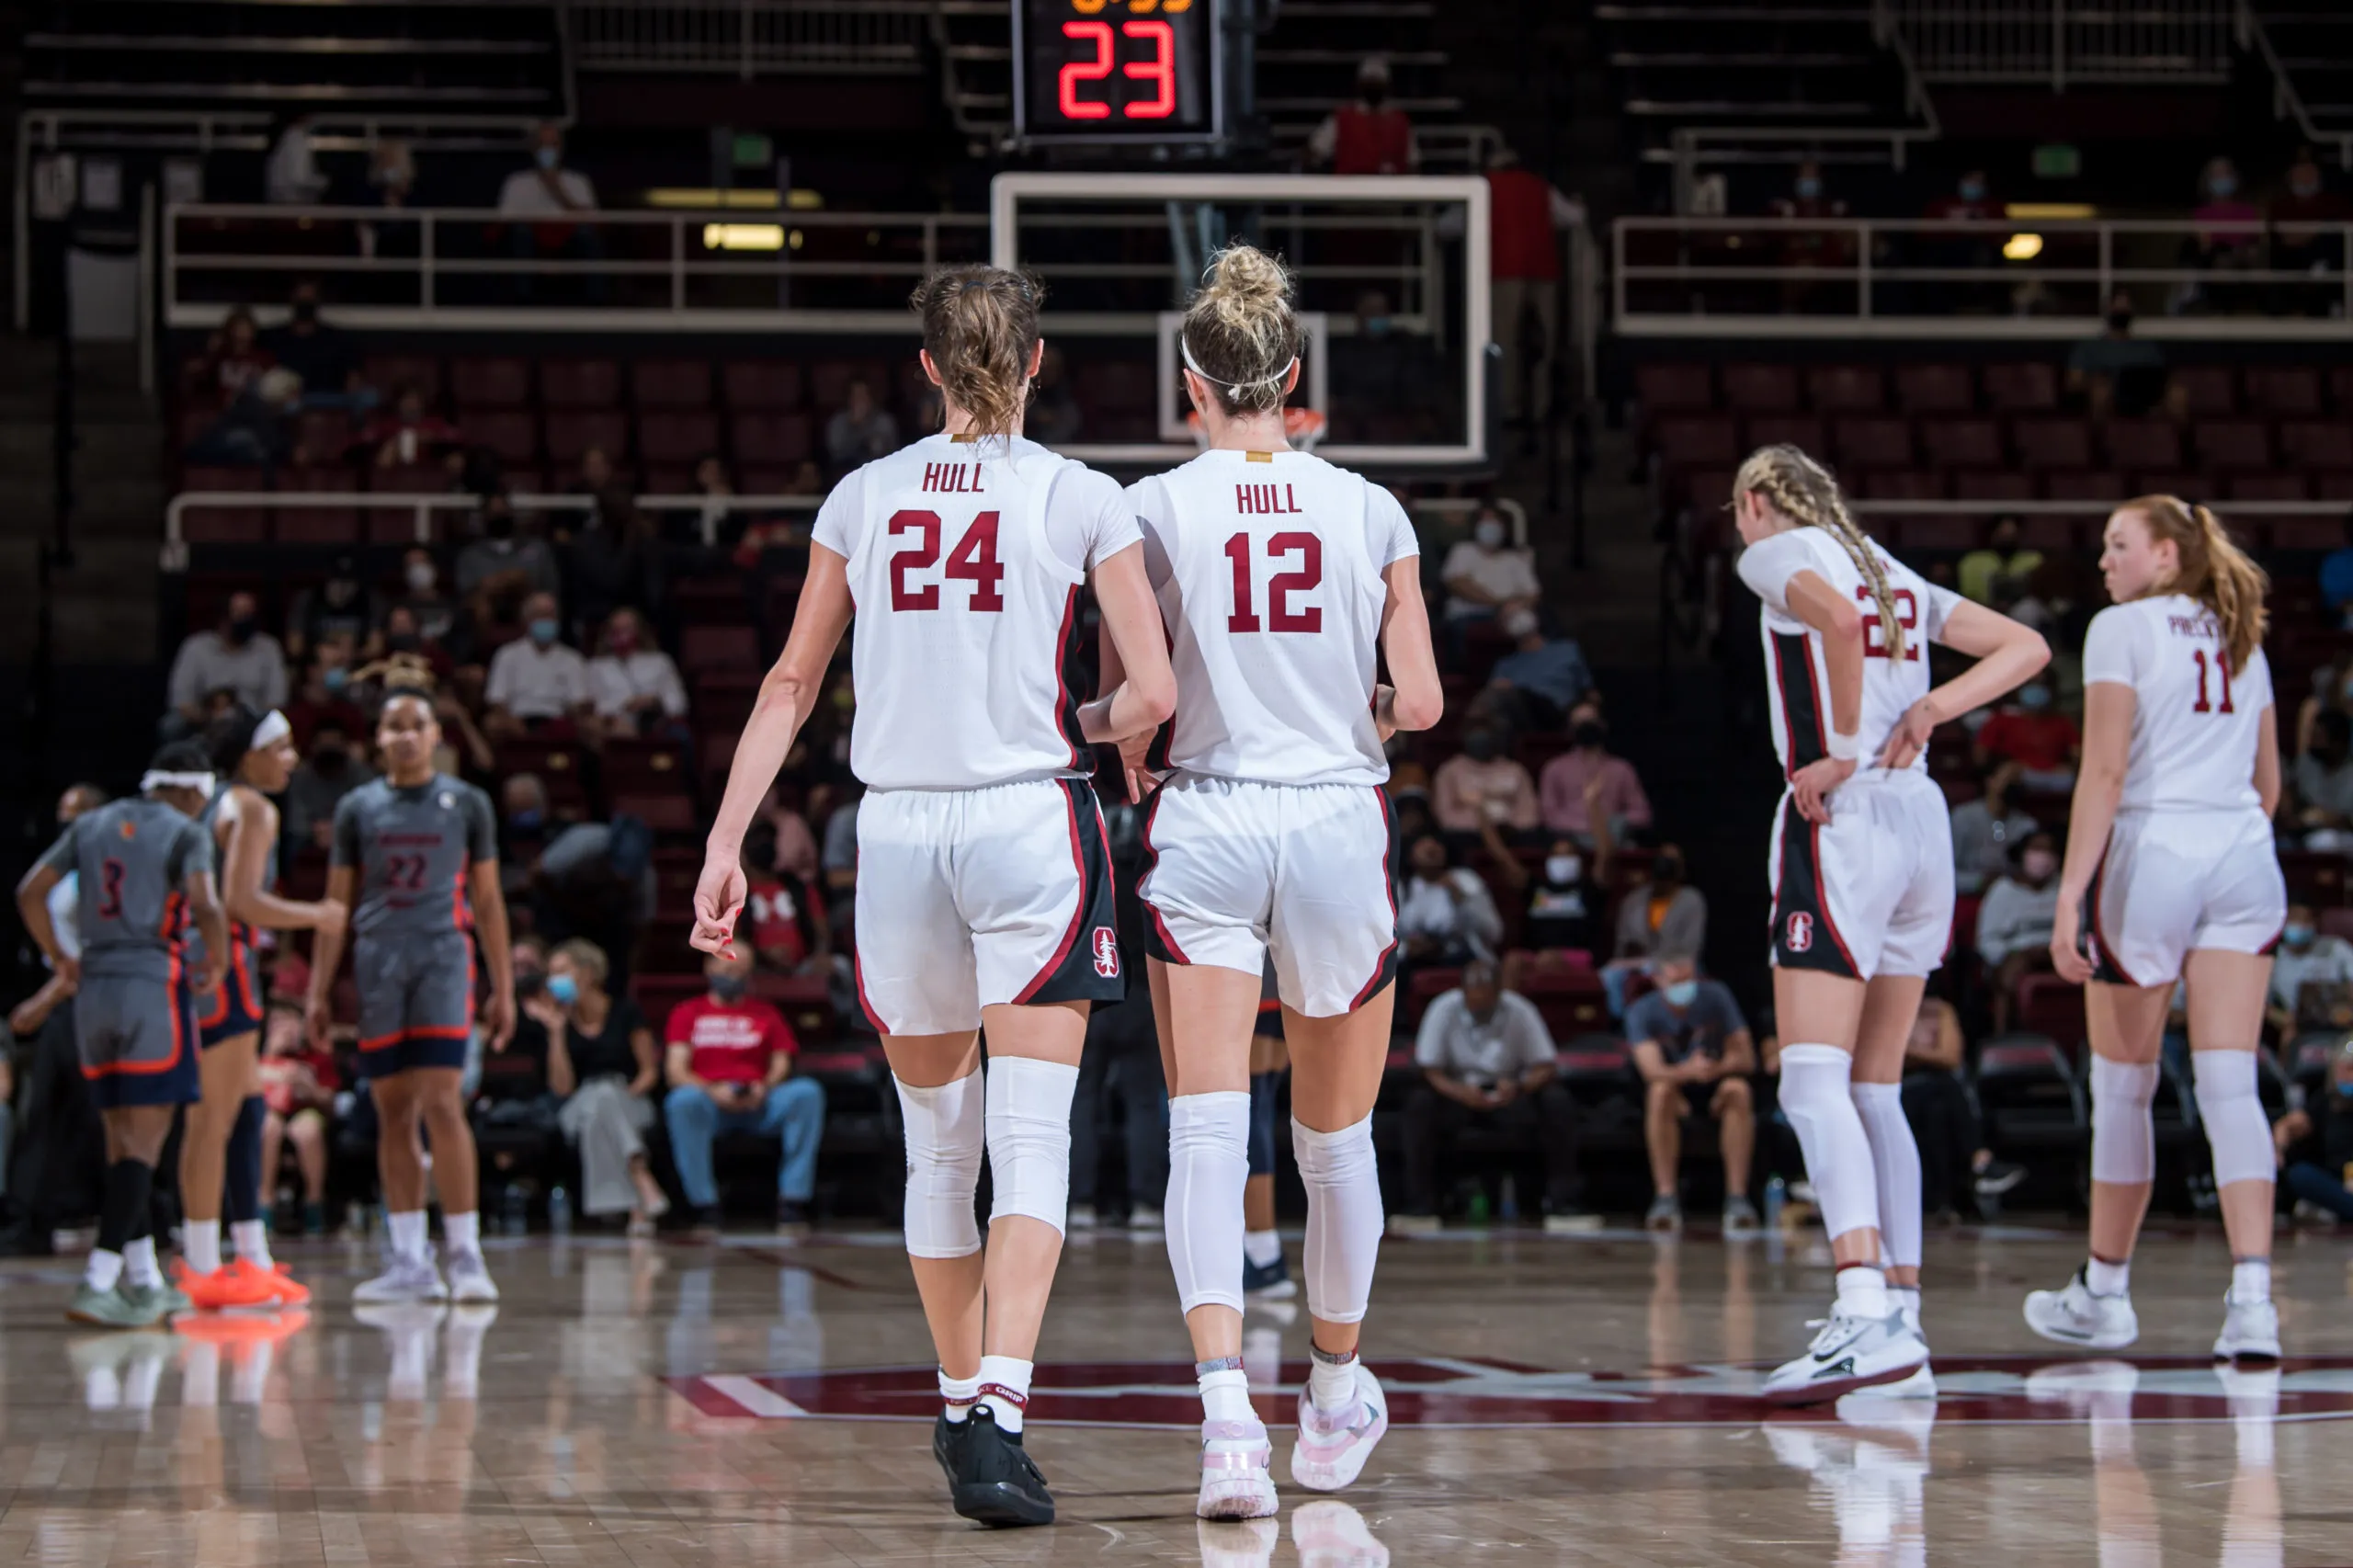 Twin talents Hull sisters shine on Stanford women’s basketball